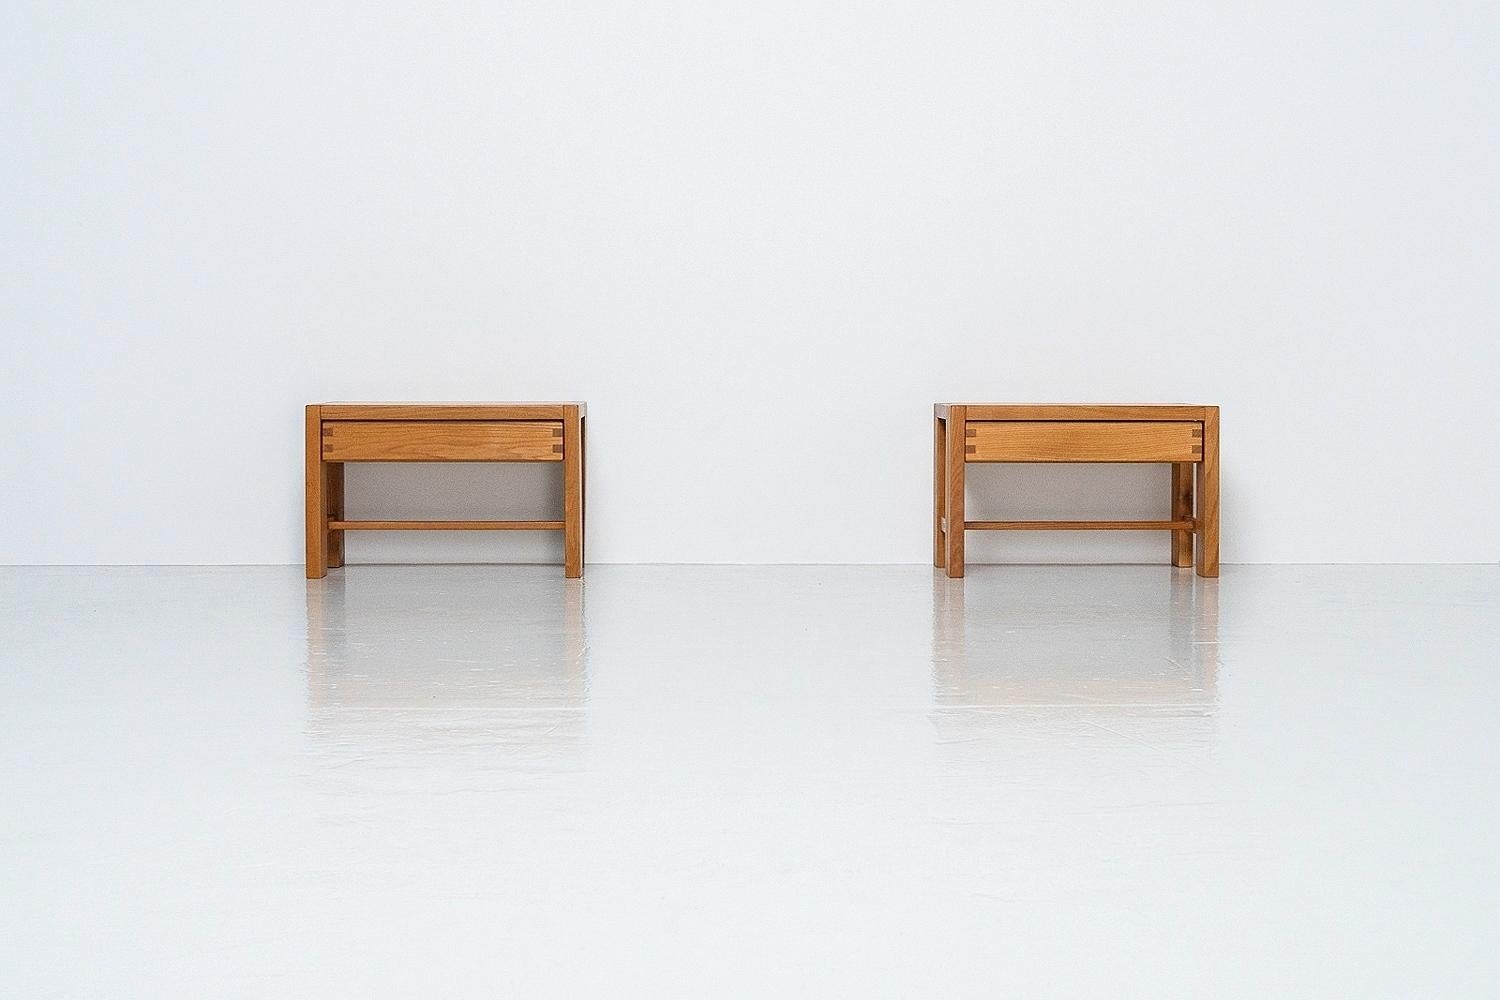 Stunning pair of night tables or cabinets model T07, designed by the master woodworker Pierre Chapo and manufactured in his own atelier in France, 1960s. Thee nightstands are characteristic for his work and the very modest and simplistic design is